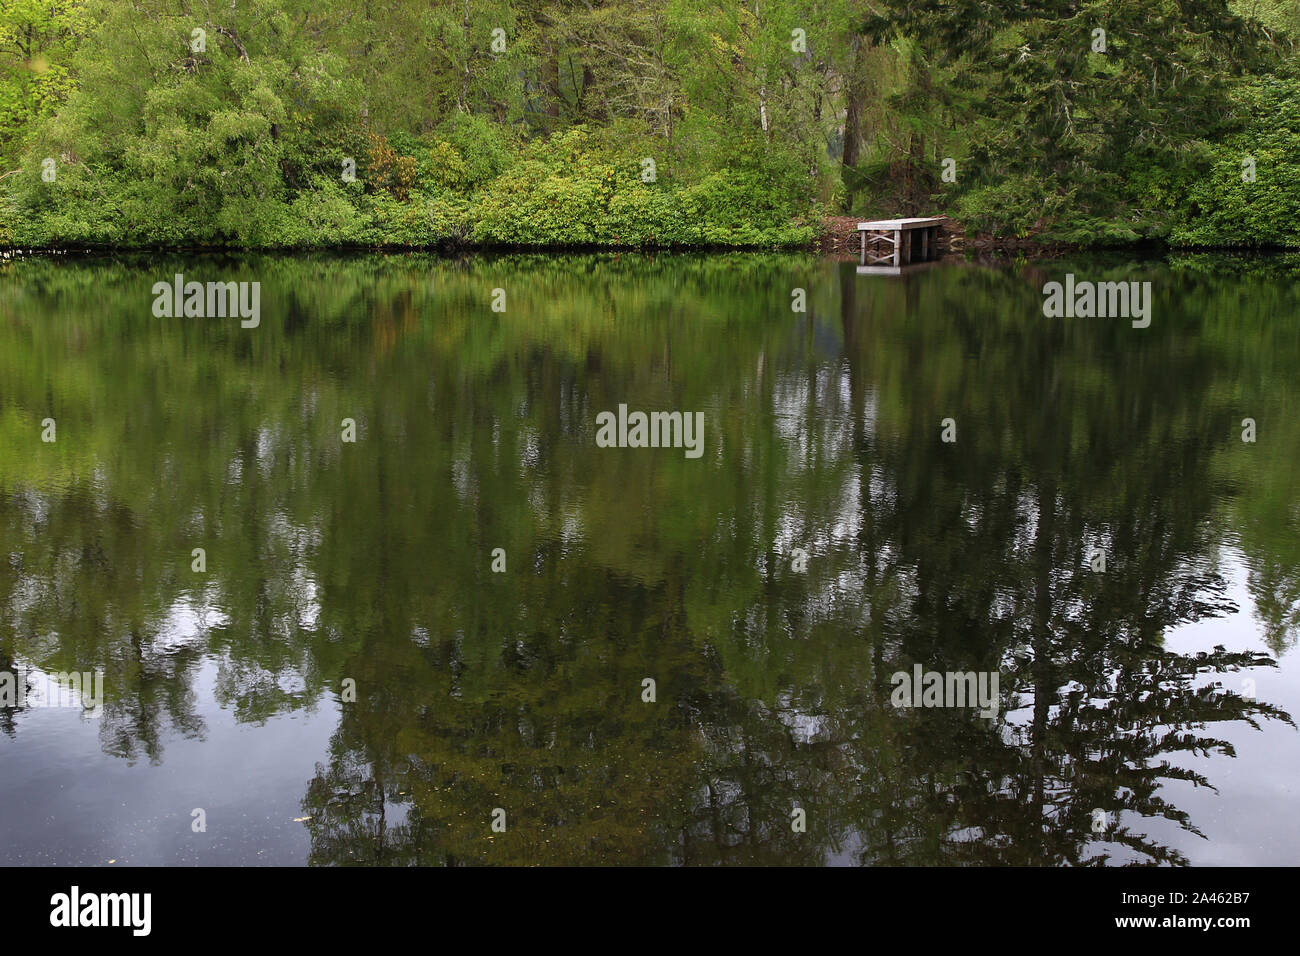 A small wooden landing stage is reflected in the calm water of a tiny, peaceful loch surrounded by thick greenery in Glen Affric (Scottish Highlands) Stock Photo